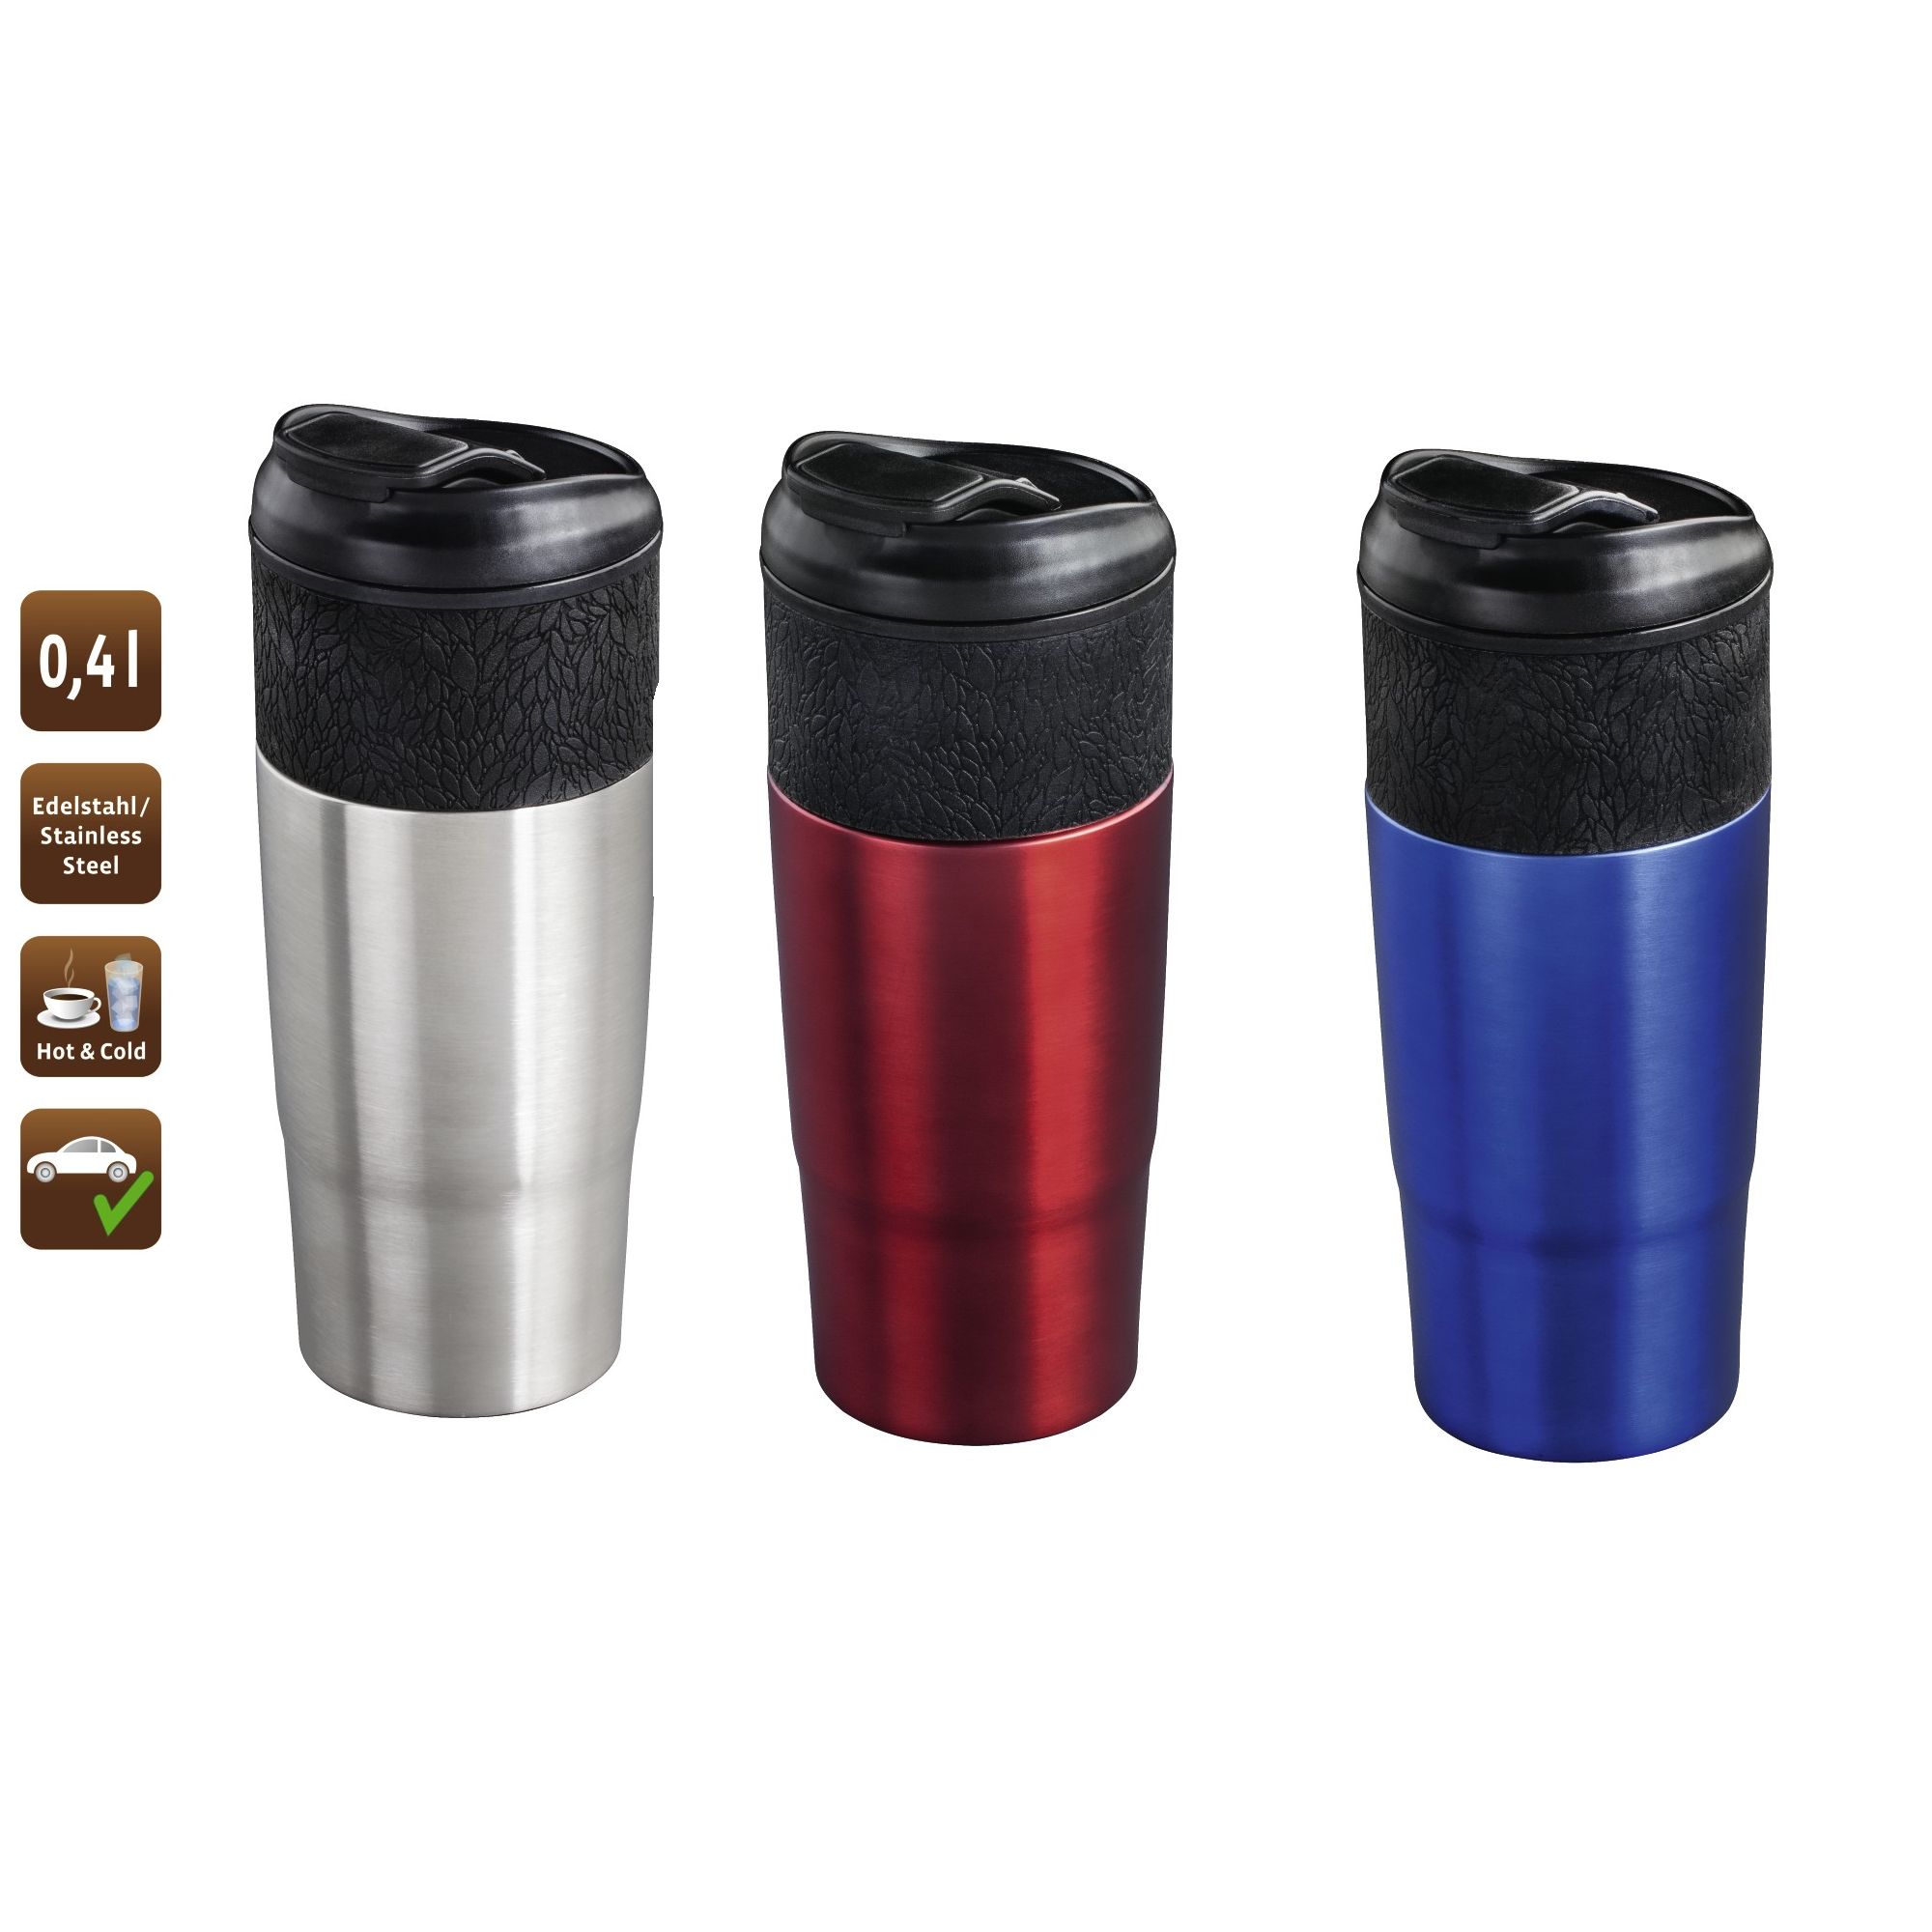 S Steel Flask Insulated Travel Mug Warm Hot Tea Coffee Drink Outdoor Thermal Cup